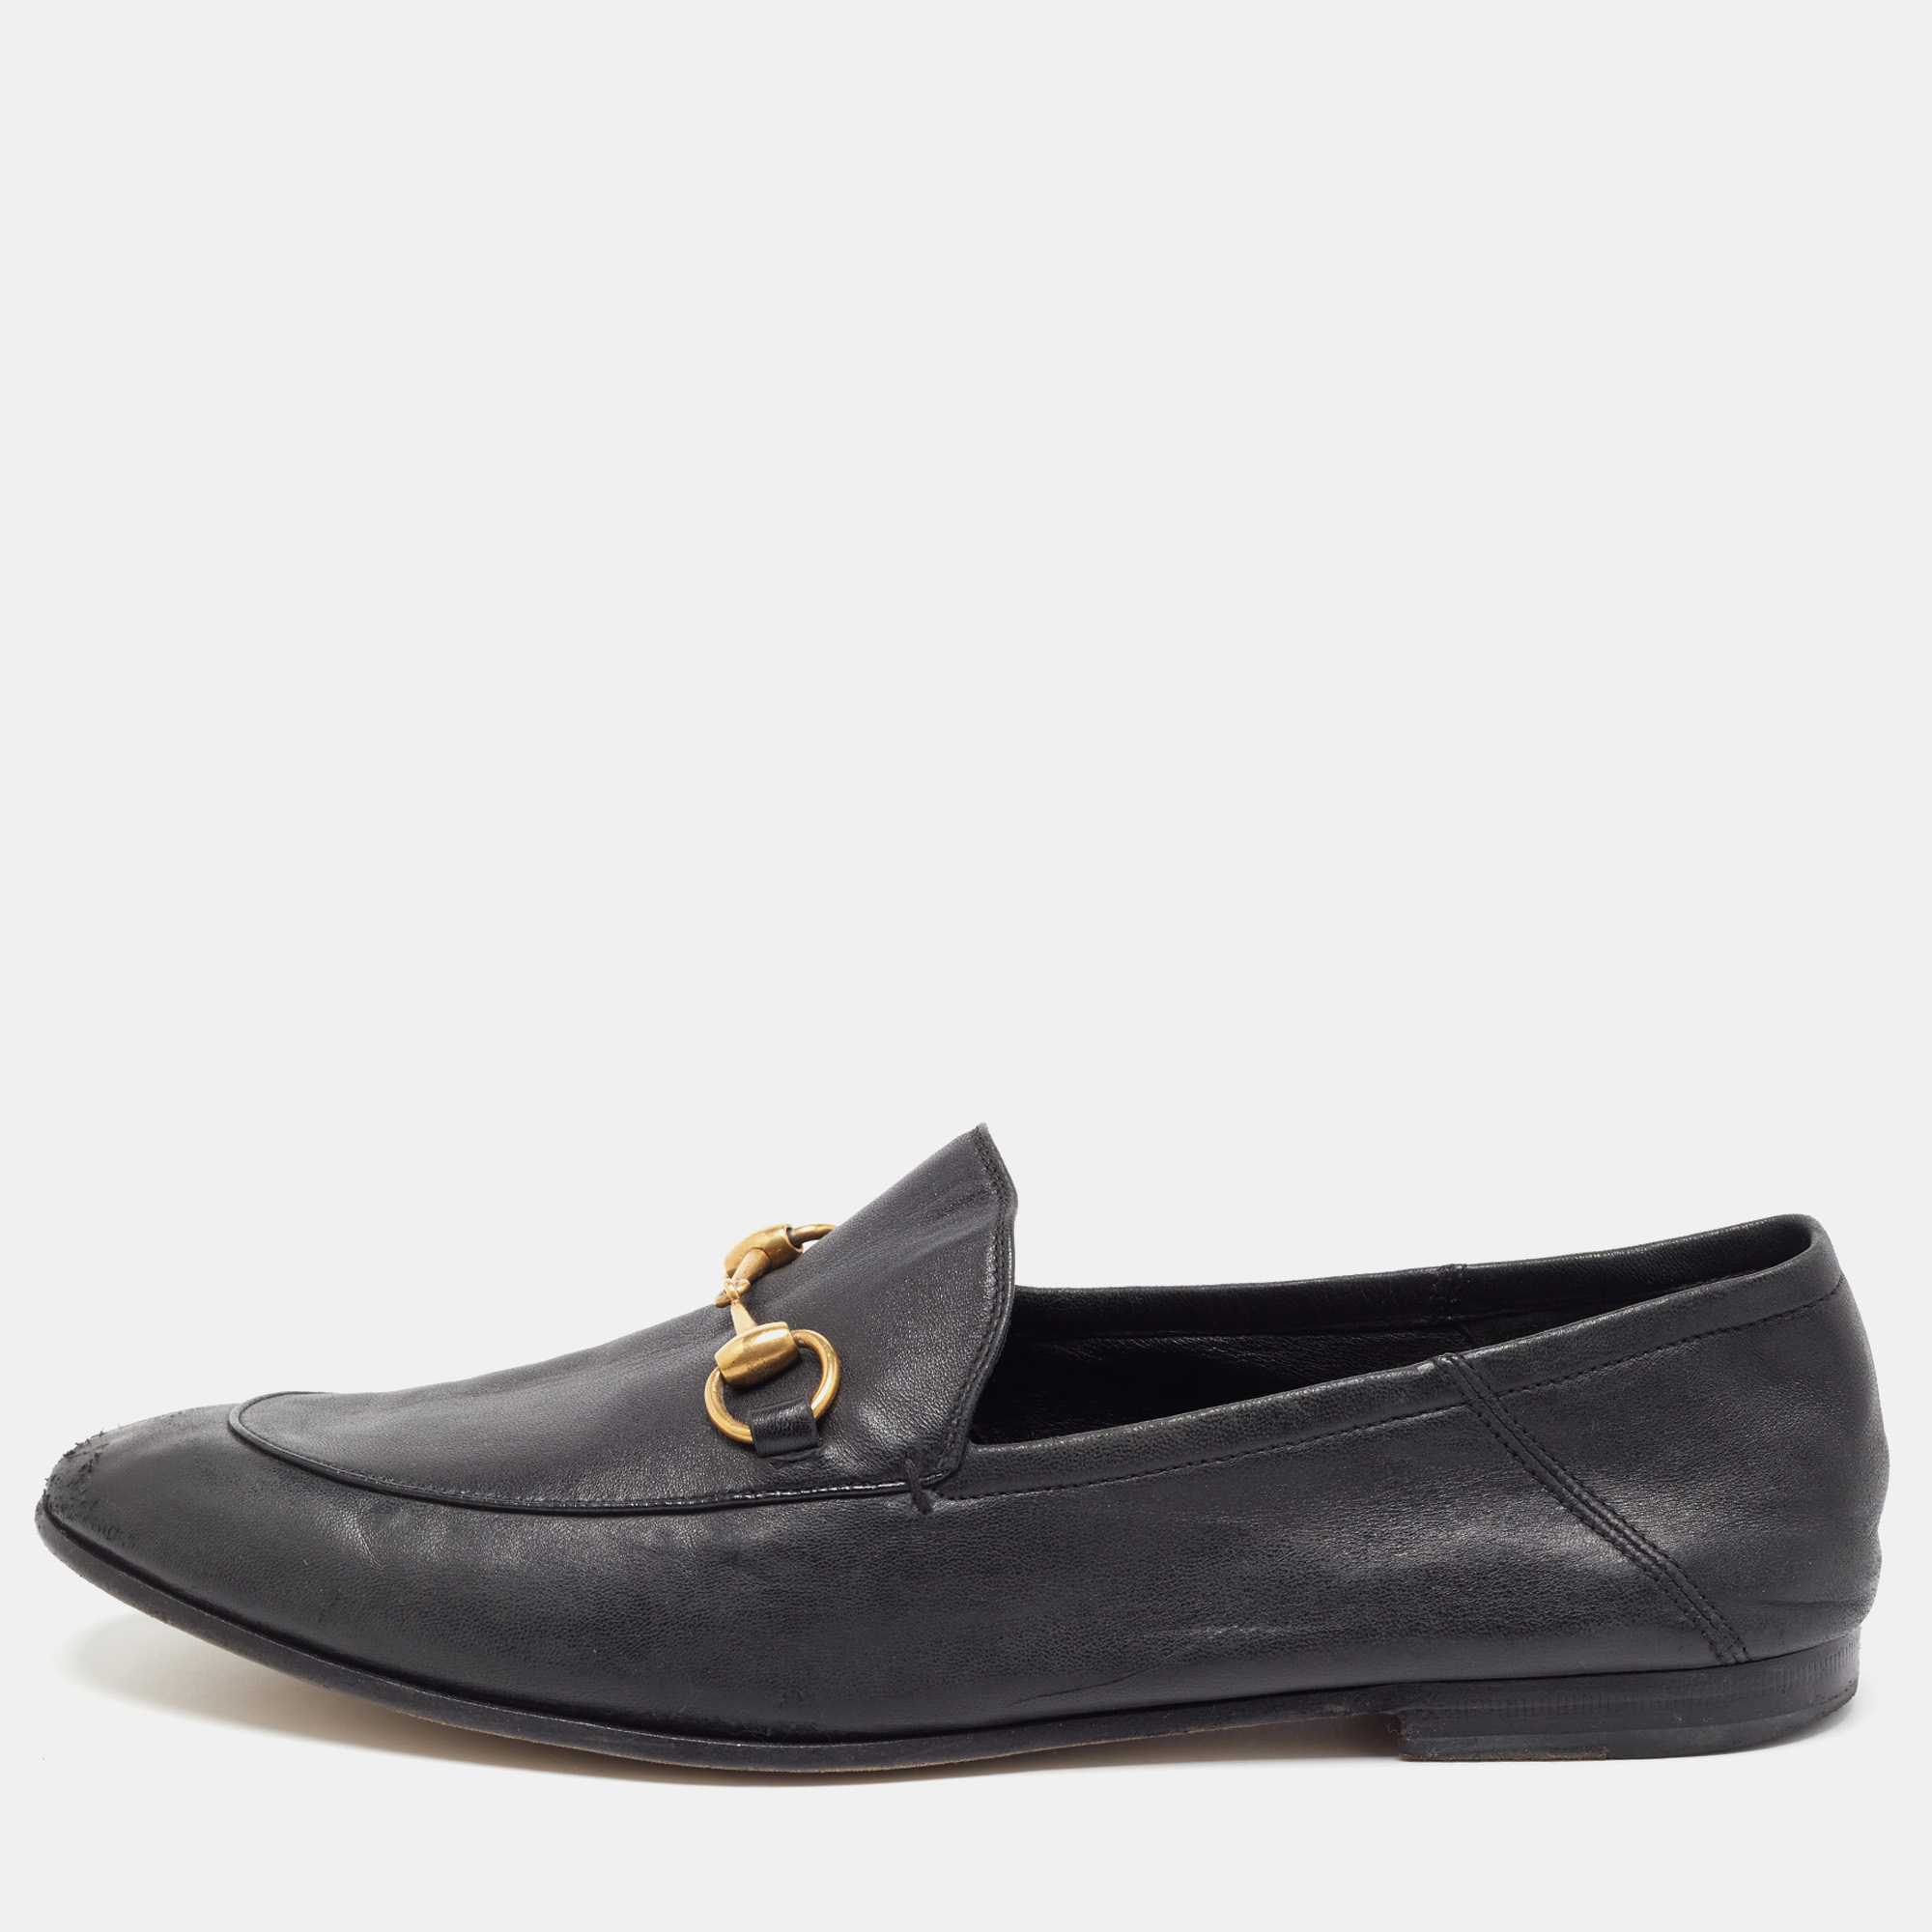 Gucci black leather jordaan loafers size 44